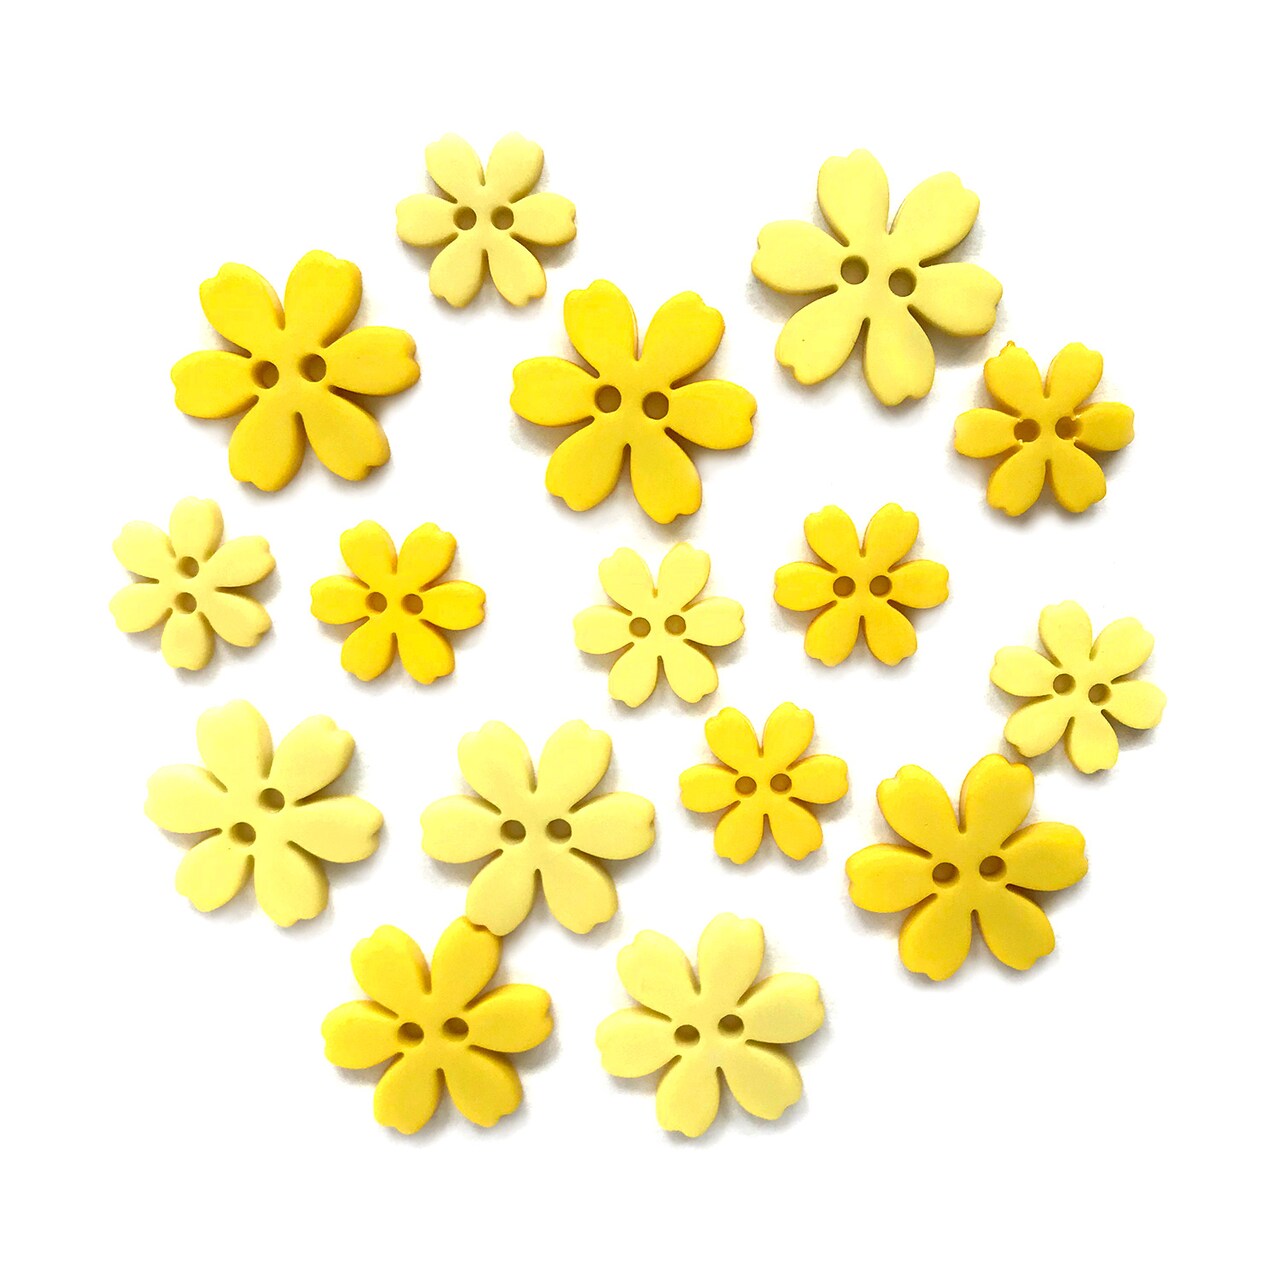 Buttons Galore and More Flower Shaped Novelty Buttons for Sewing & Craft -  48 Buttons